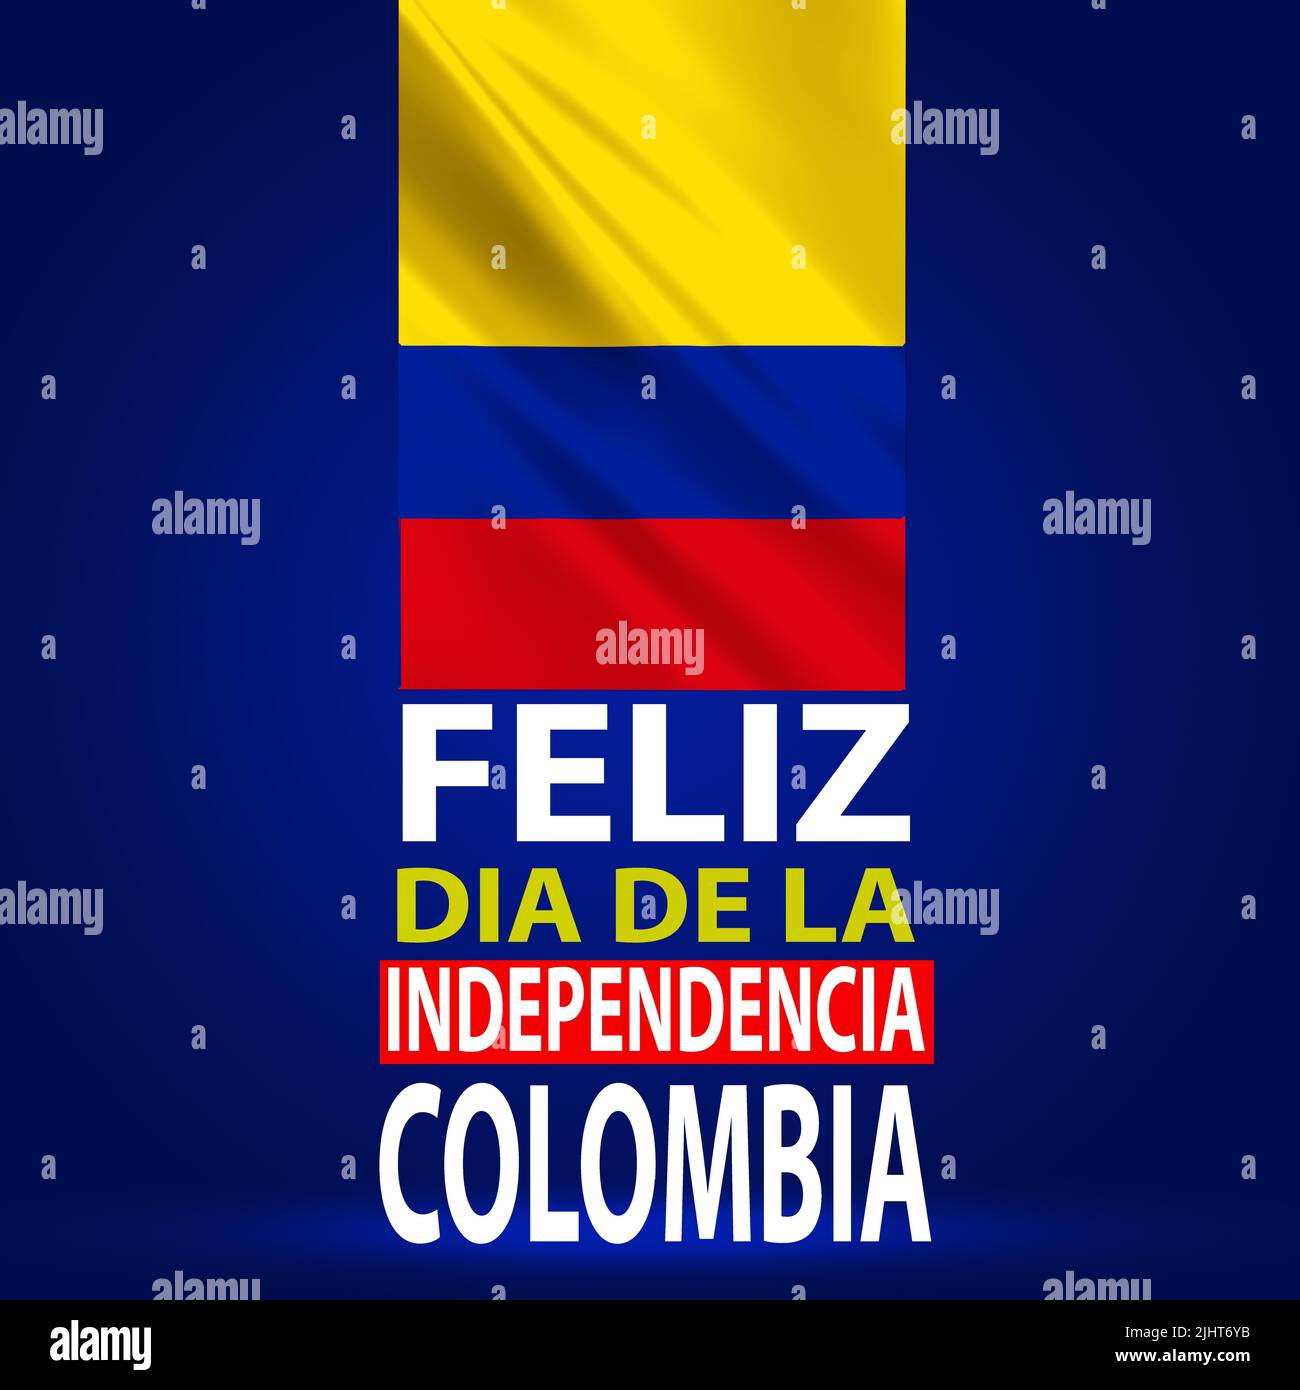 Feliz Dia De La Independencia Colombia Wallpaper with Waving Flag. Abstract national holiday celebration and wishes illustratio Stock Photo